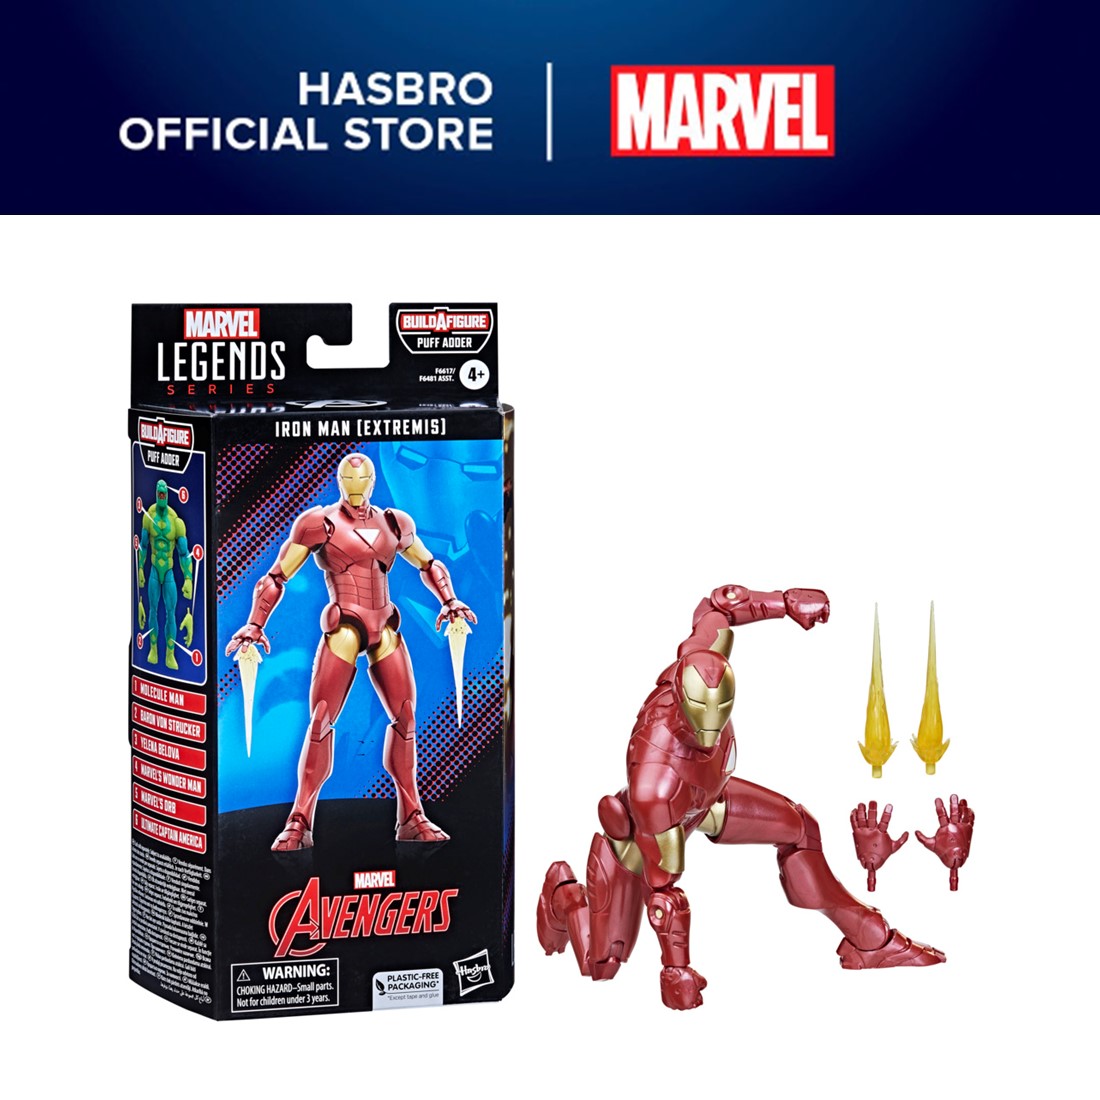 Marvel Legends Series 6-inch Scale Action Figure The Hydra Stomper Toy,  Premium Design, 6-Inch Scale Figure Figure, 